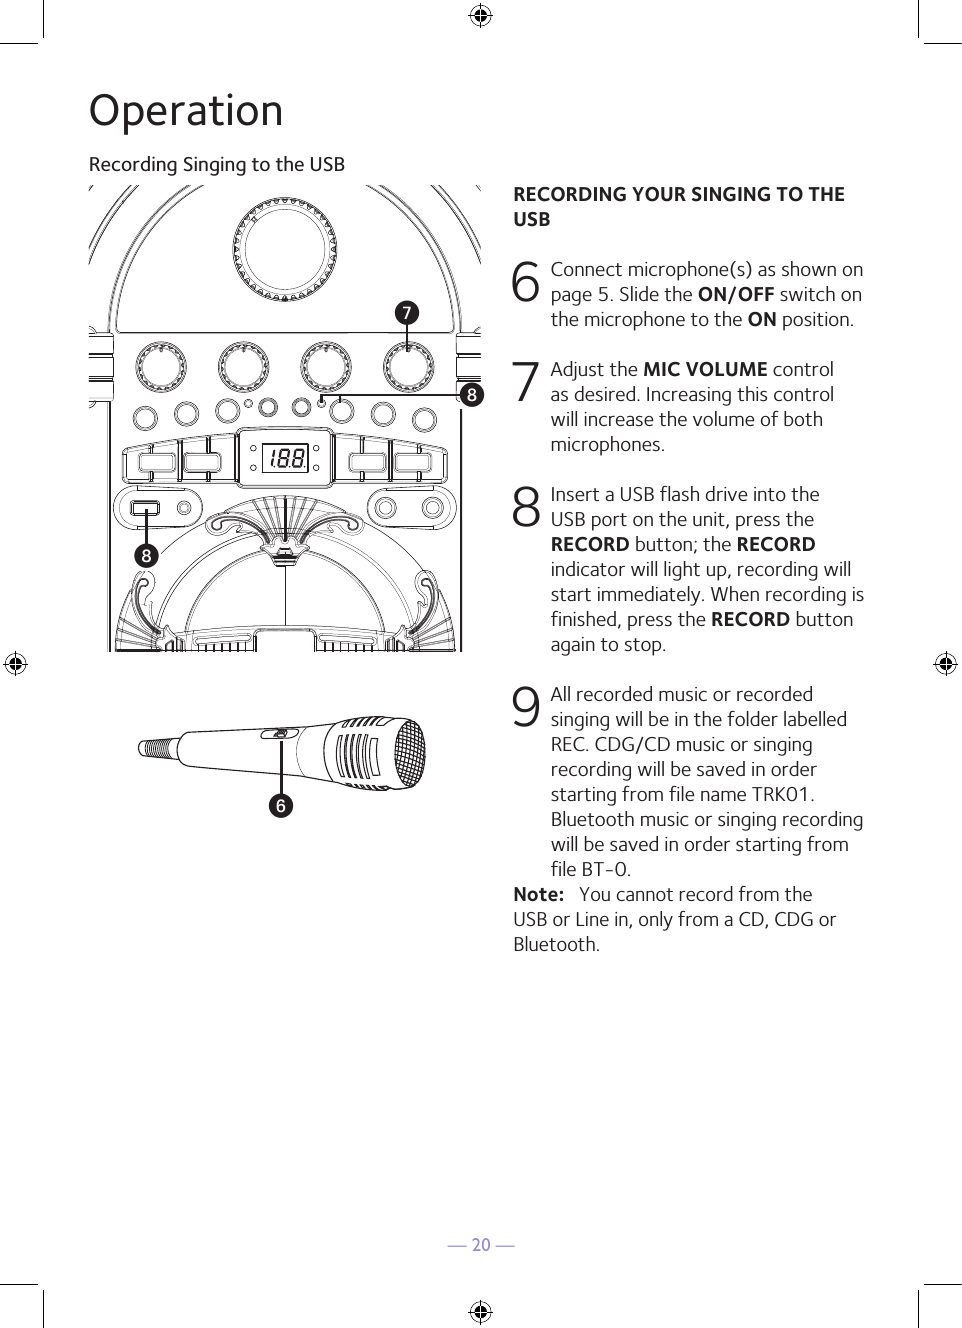 — 20 —RECORDING YOUR SINGING TO THE USB6 Connect microphone(s) as shown on page 5. Slide the ON/OFF switch on the microphone to the ON position. 7  Adjust the MIC VOLUME control as desired. Increasing this control will increase the volume of both microphones.8 Insert a USB flash drive into the USB port on the unit, press the RECORD button; the RECORD indicator will light up, recording will start immediately. When recording is finished, press the RECORD button again to stop.9 All recorded music or recorded singing will be in the folder labelled REC. CDG/CD music or singing recording will be saved in order starting from file name TRK01. Bluetooth music or singing recording will be saved in order starting from file BT-0.Note:   You cannot record from the USB or Line in, only from a CD, CDG or Bluetooth.OperationRecording Singing to the USBUWWV